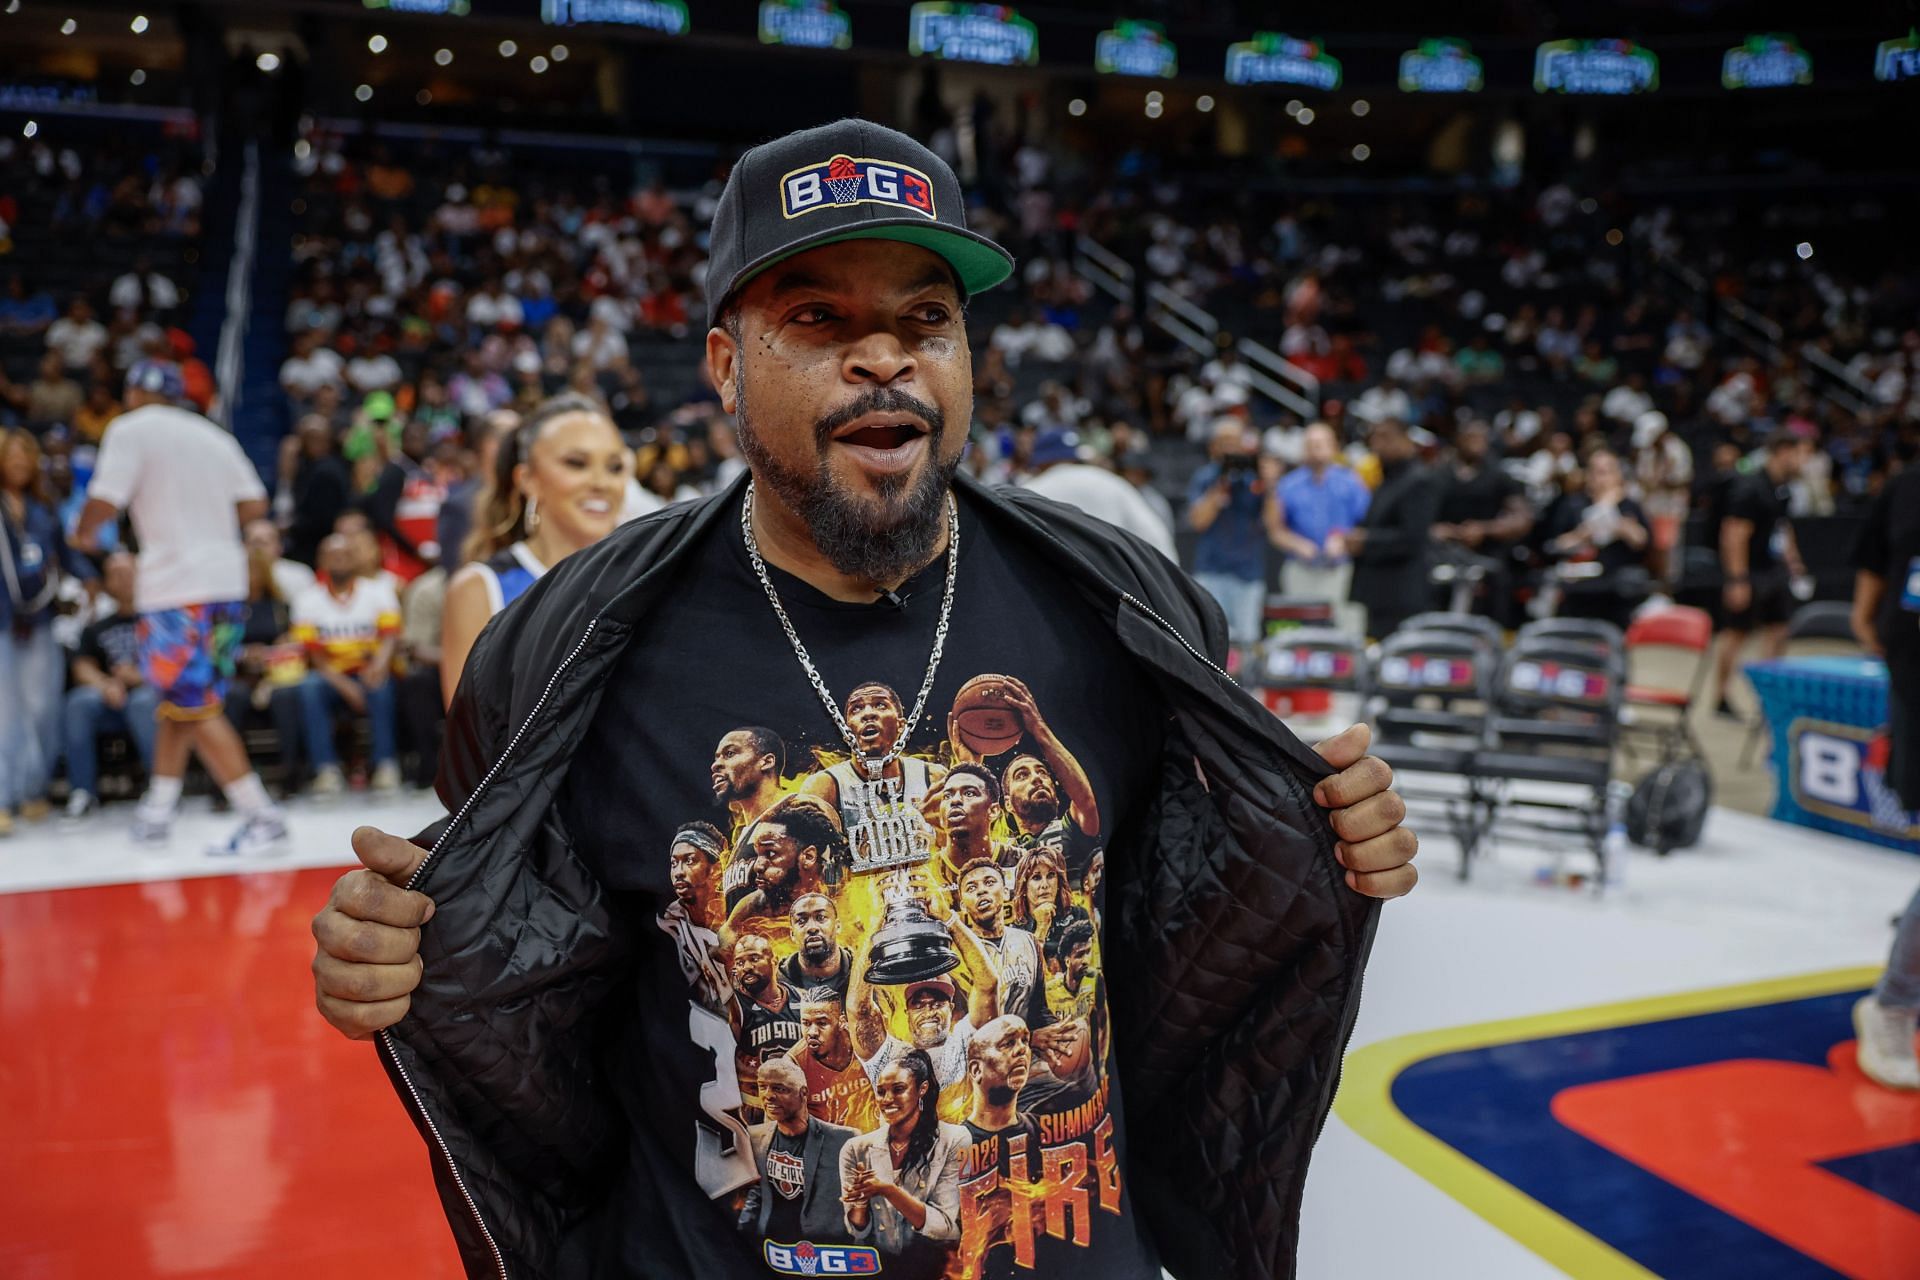 Ice Cube at the Monster Energy BIG3 Celebrity Game Tips Off BIG3 Playoff Weekend (Photo by Tasos Katopodis/Getty Images for Idol Roc Entertainment)